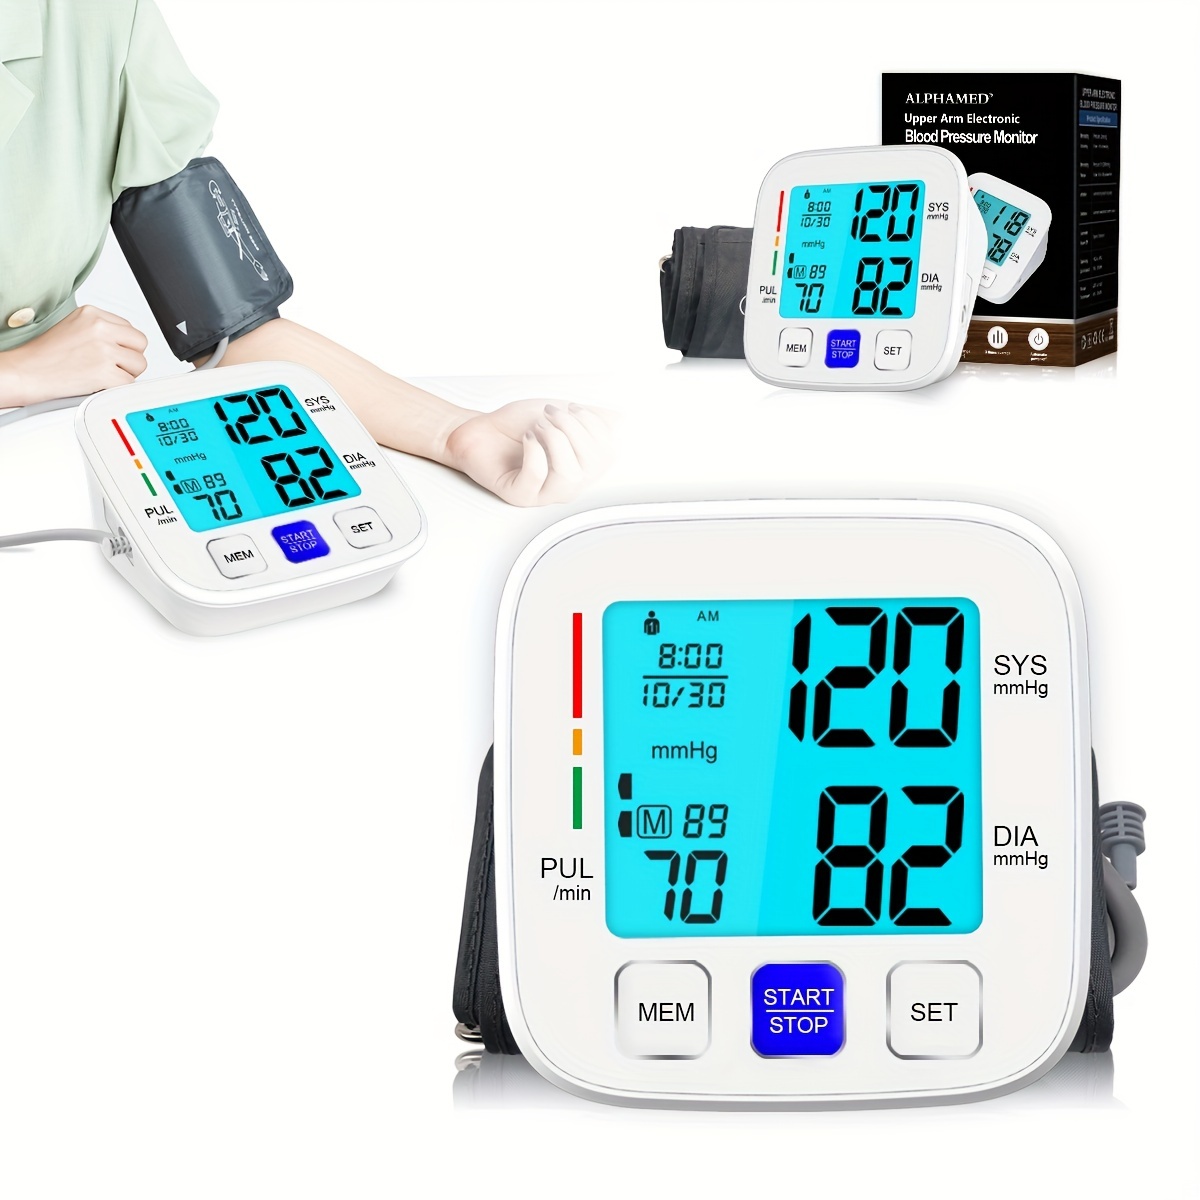 Upper Arm Blood Pressure Monitors For Home Use, Smart Bp Cuff